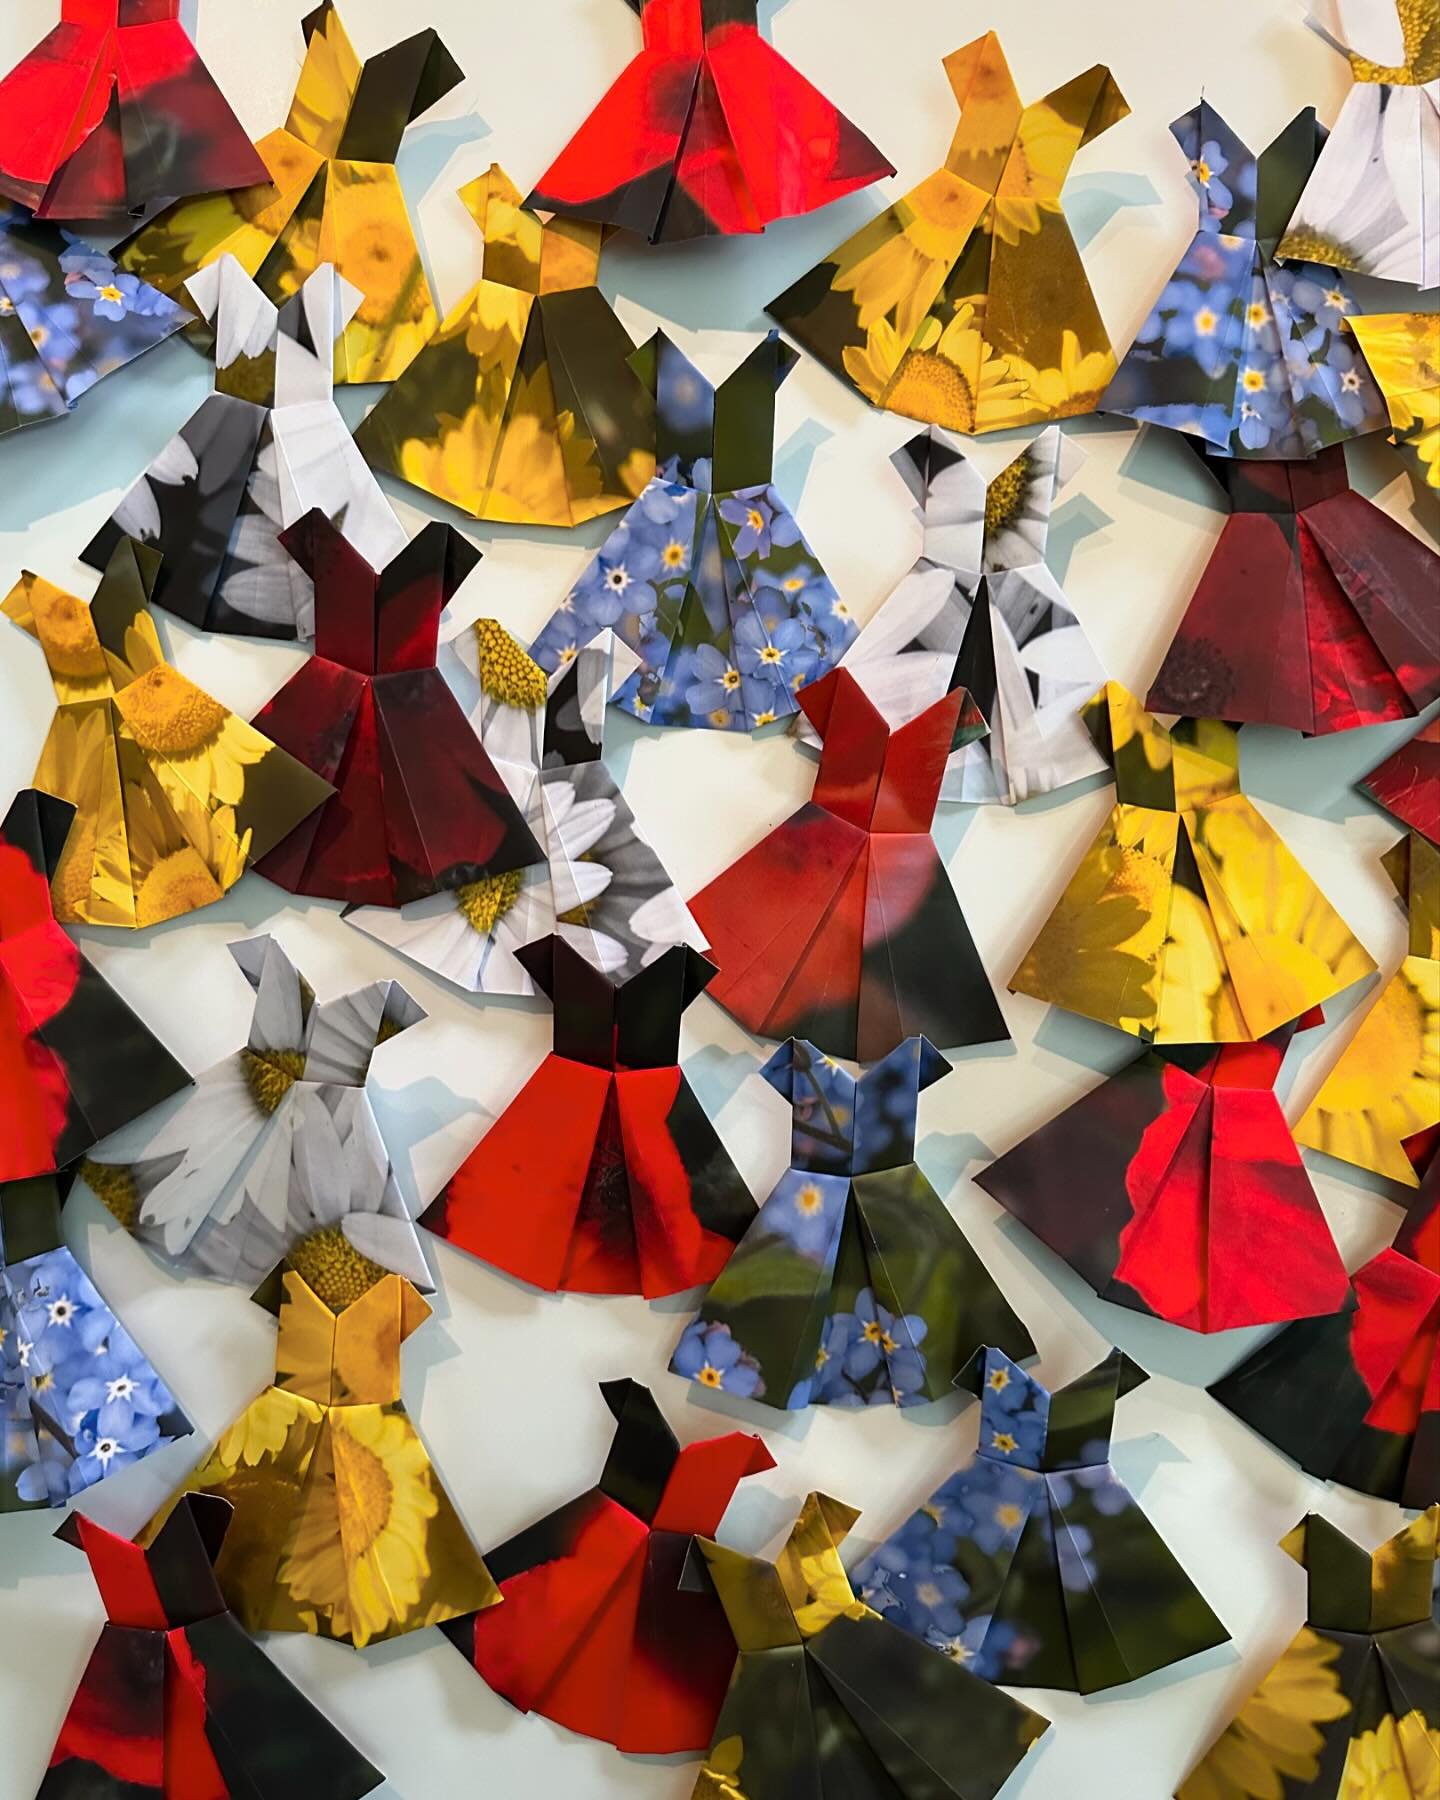 It began as a simple exercise in keeping my hands moving. A little something - just for fun. I folded one origami paper dress and then another. And before I knew it - I&rsquo;d re-immersed myself in my mother&rsquo;s garden&hellip;re-imagining the ge